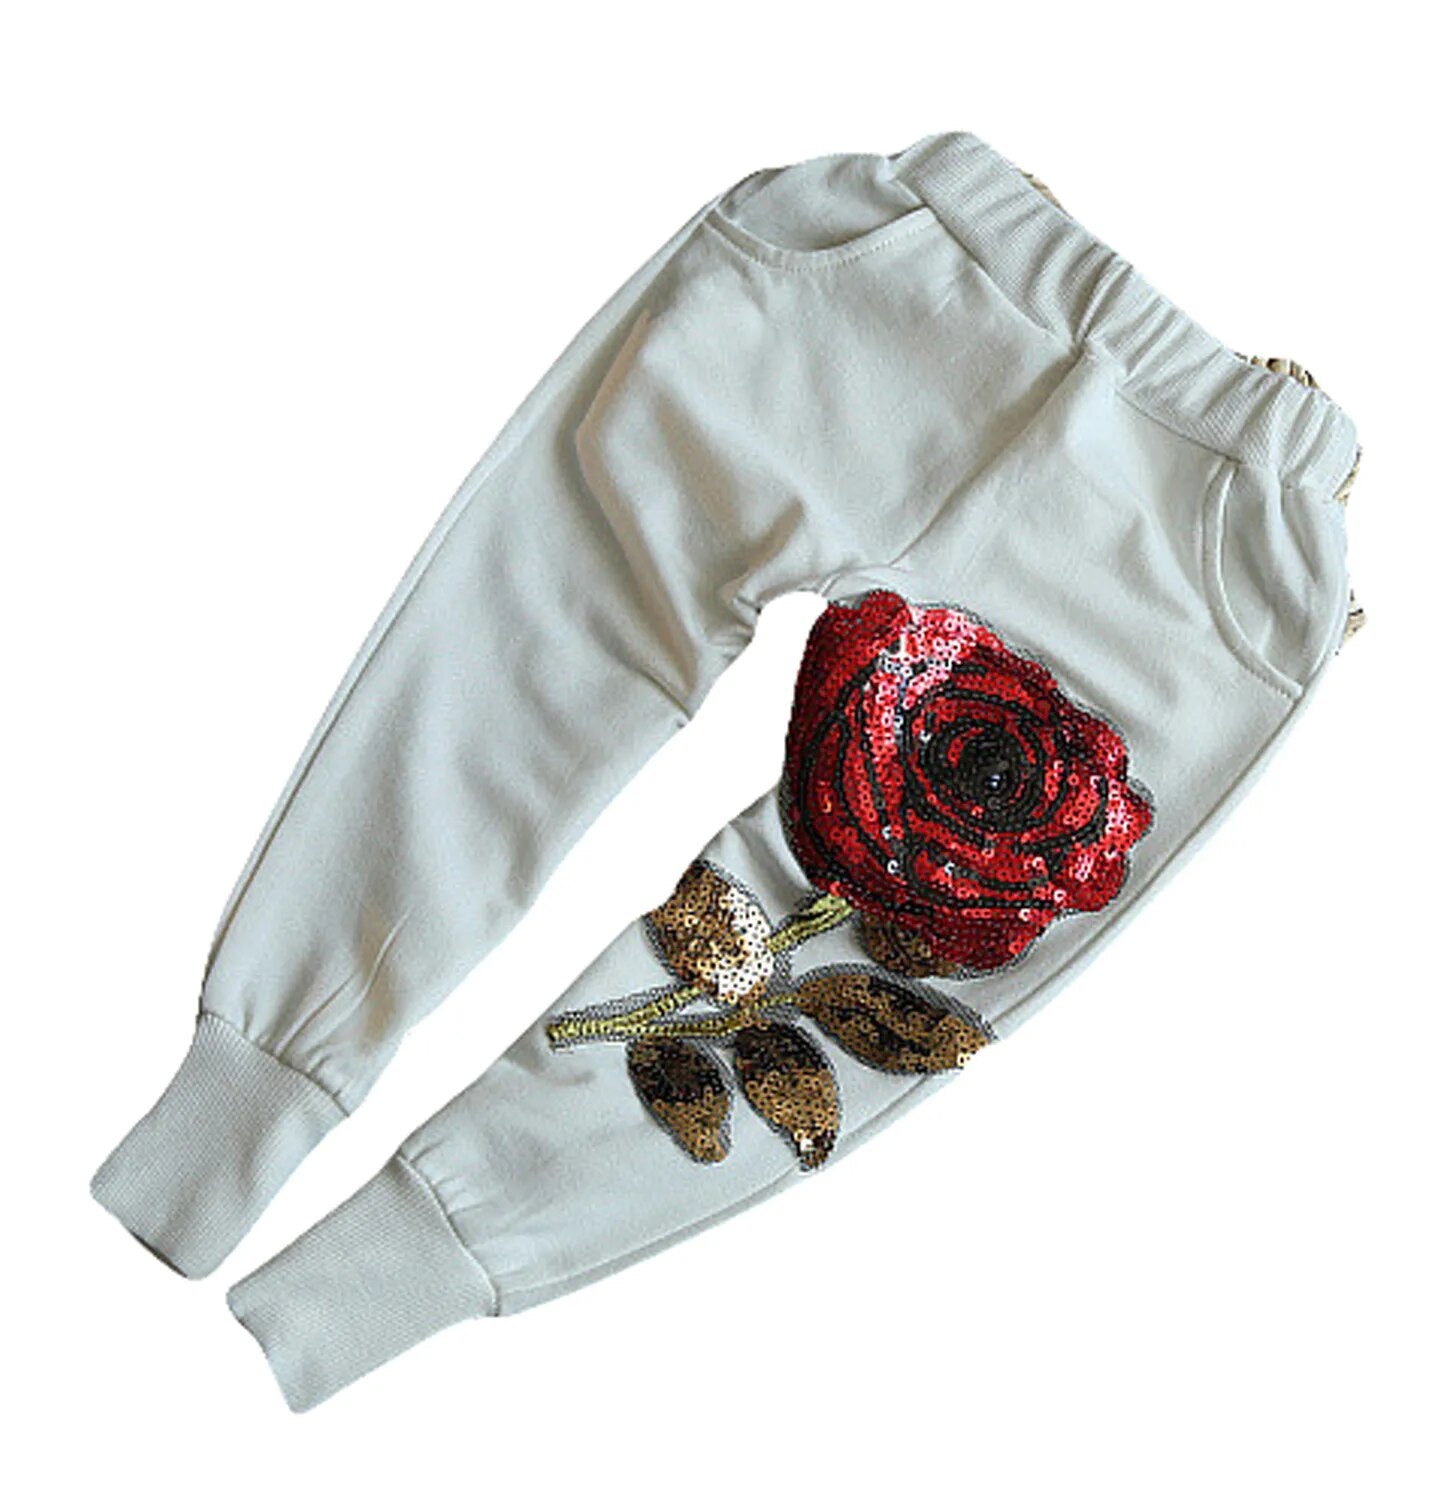 2019 Autumn Children Clothing Long Sleeve Shirts + Pants With Sequin Rose Flowers Fashion Baby Sport Suit Girl Tracksuit Clothes